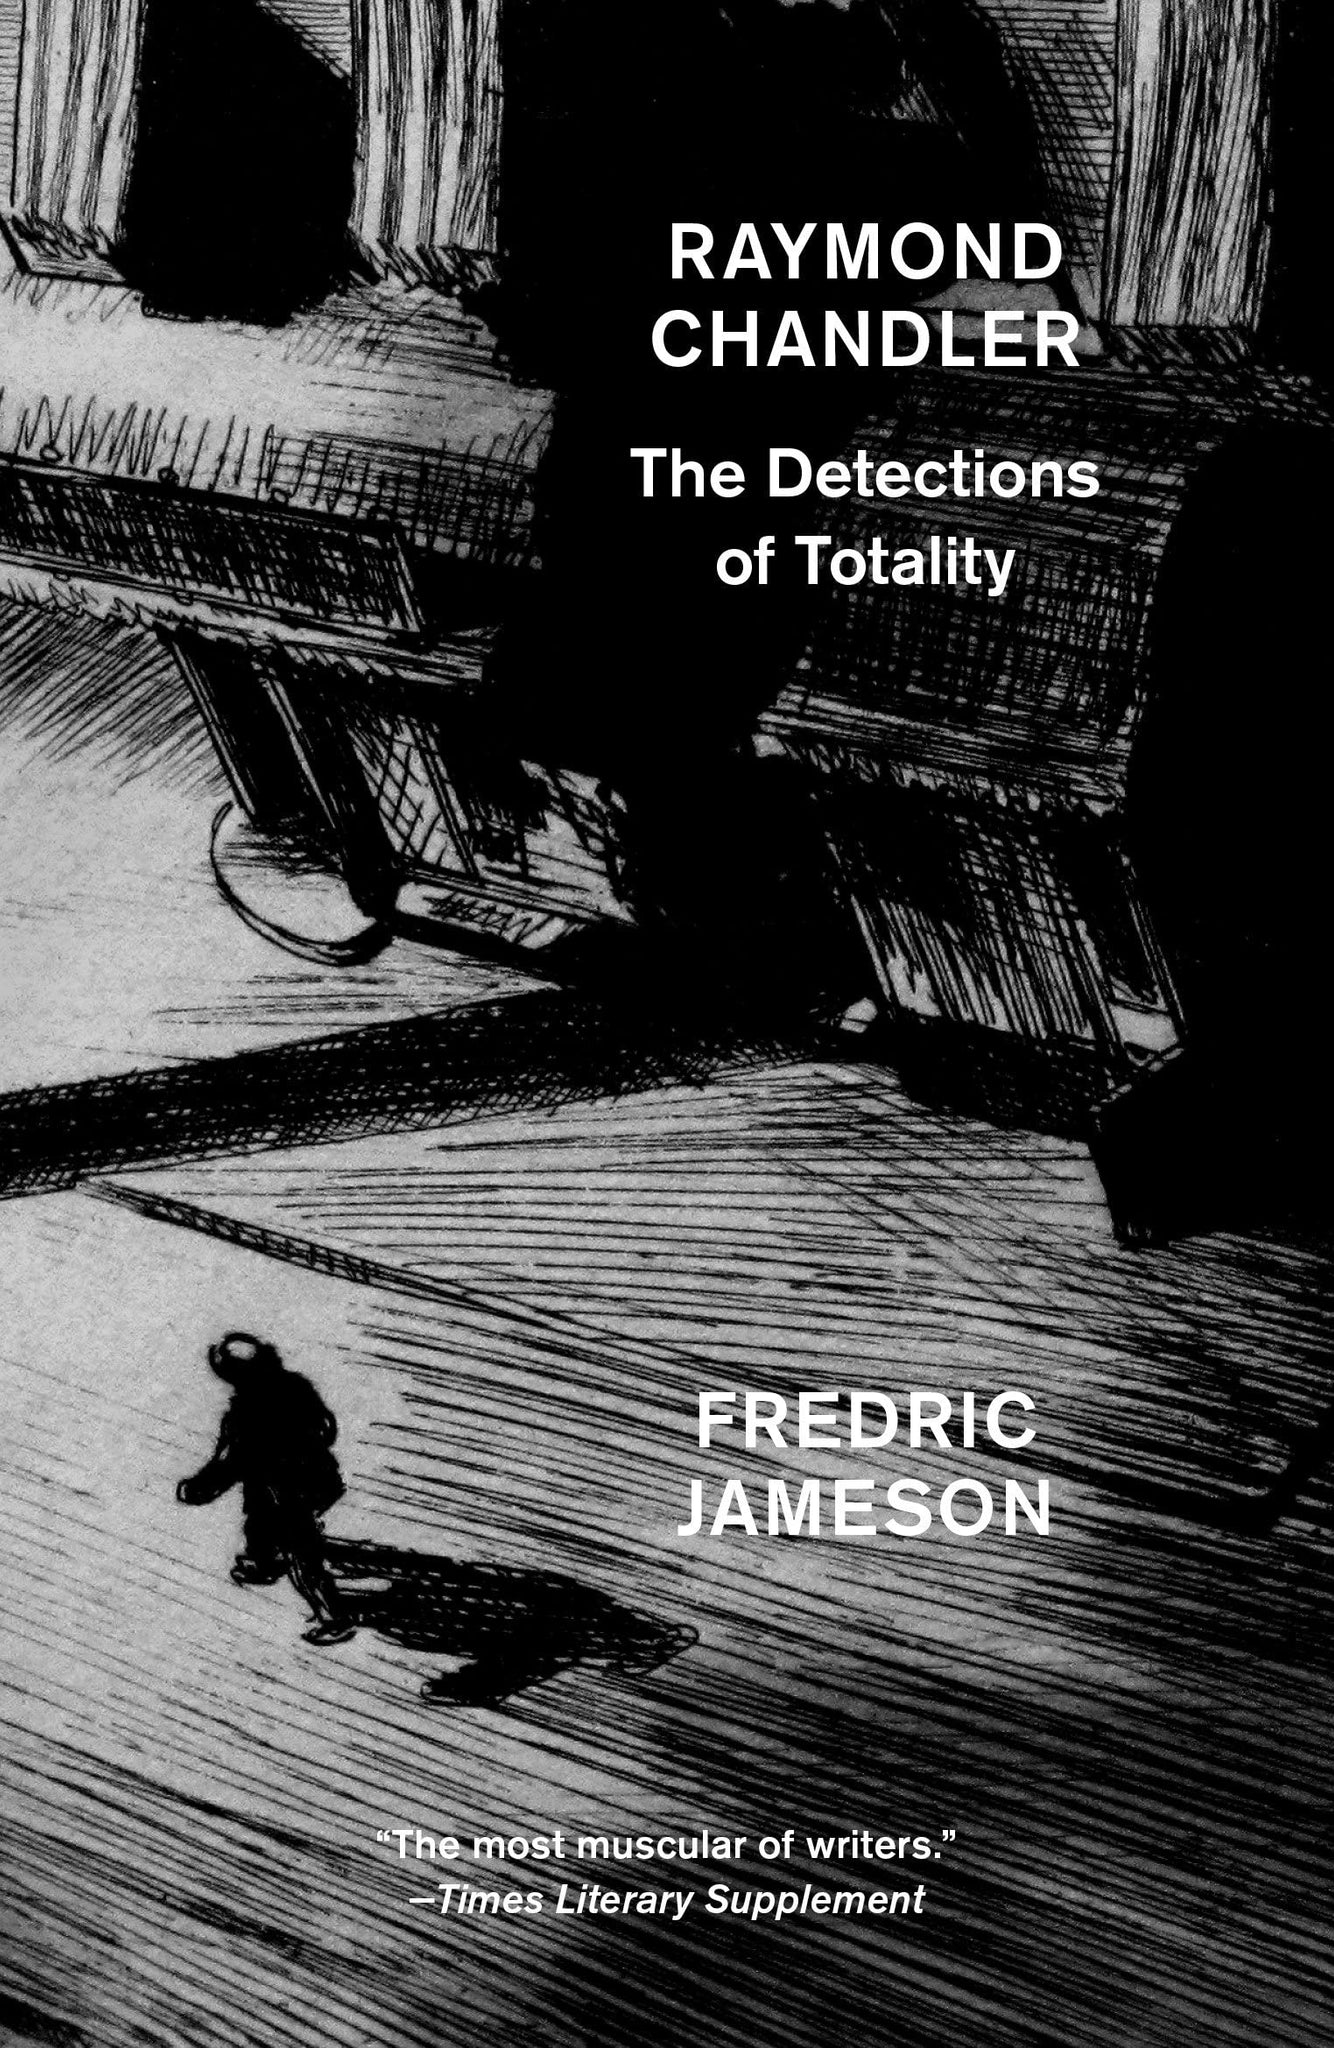 Raymond Chandler : The Detections of Totality by Fredric Jameson